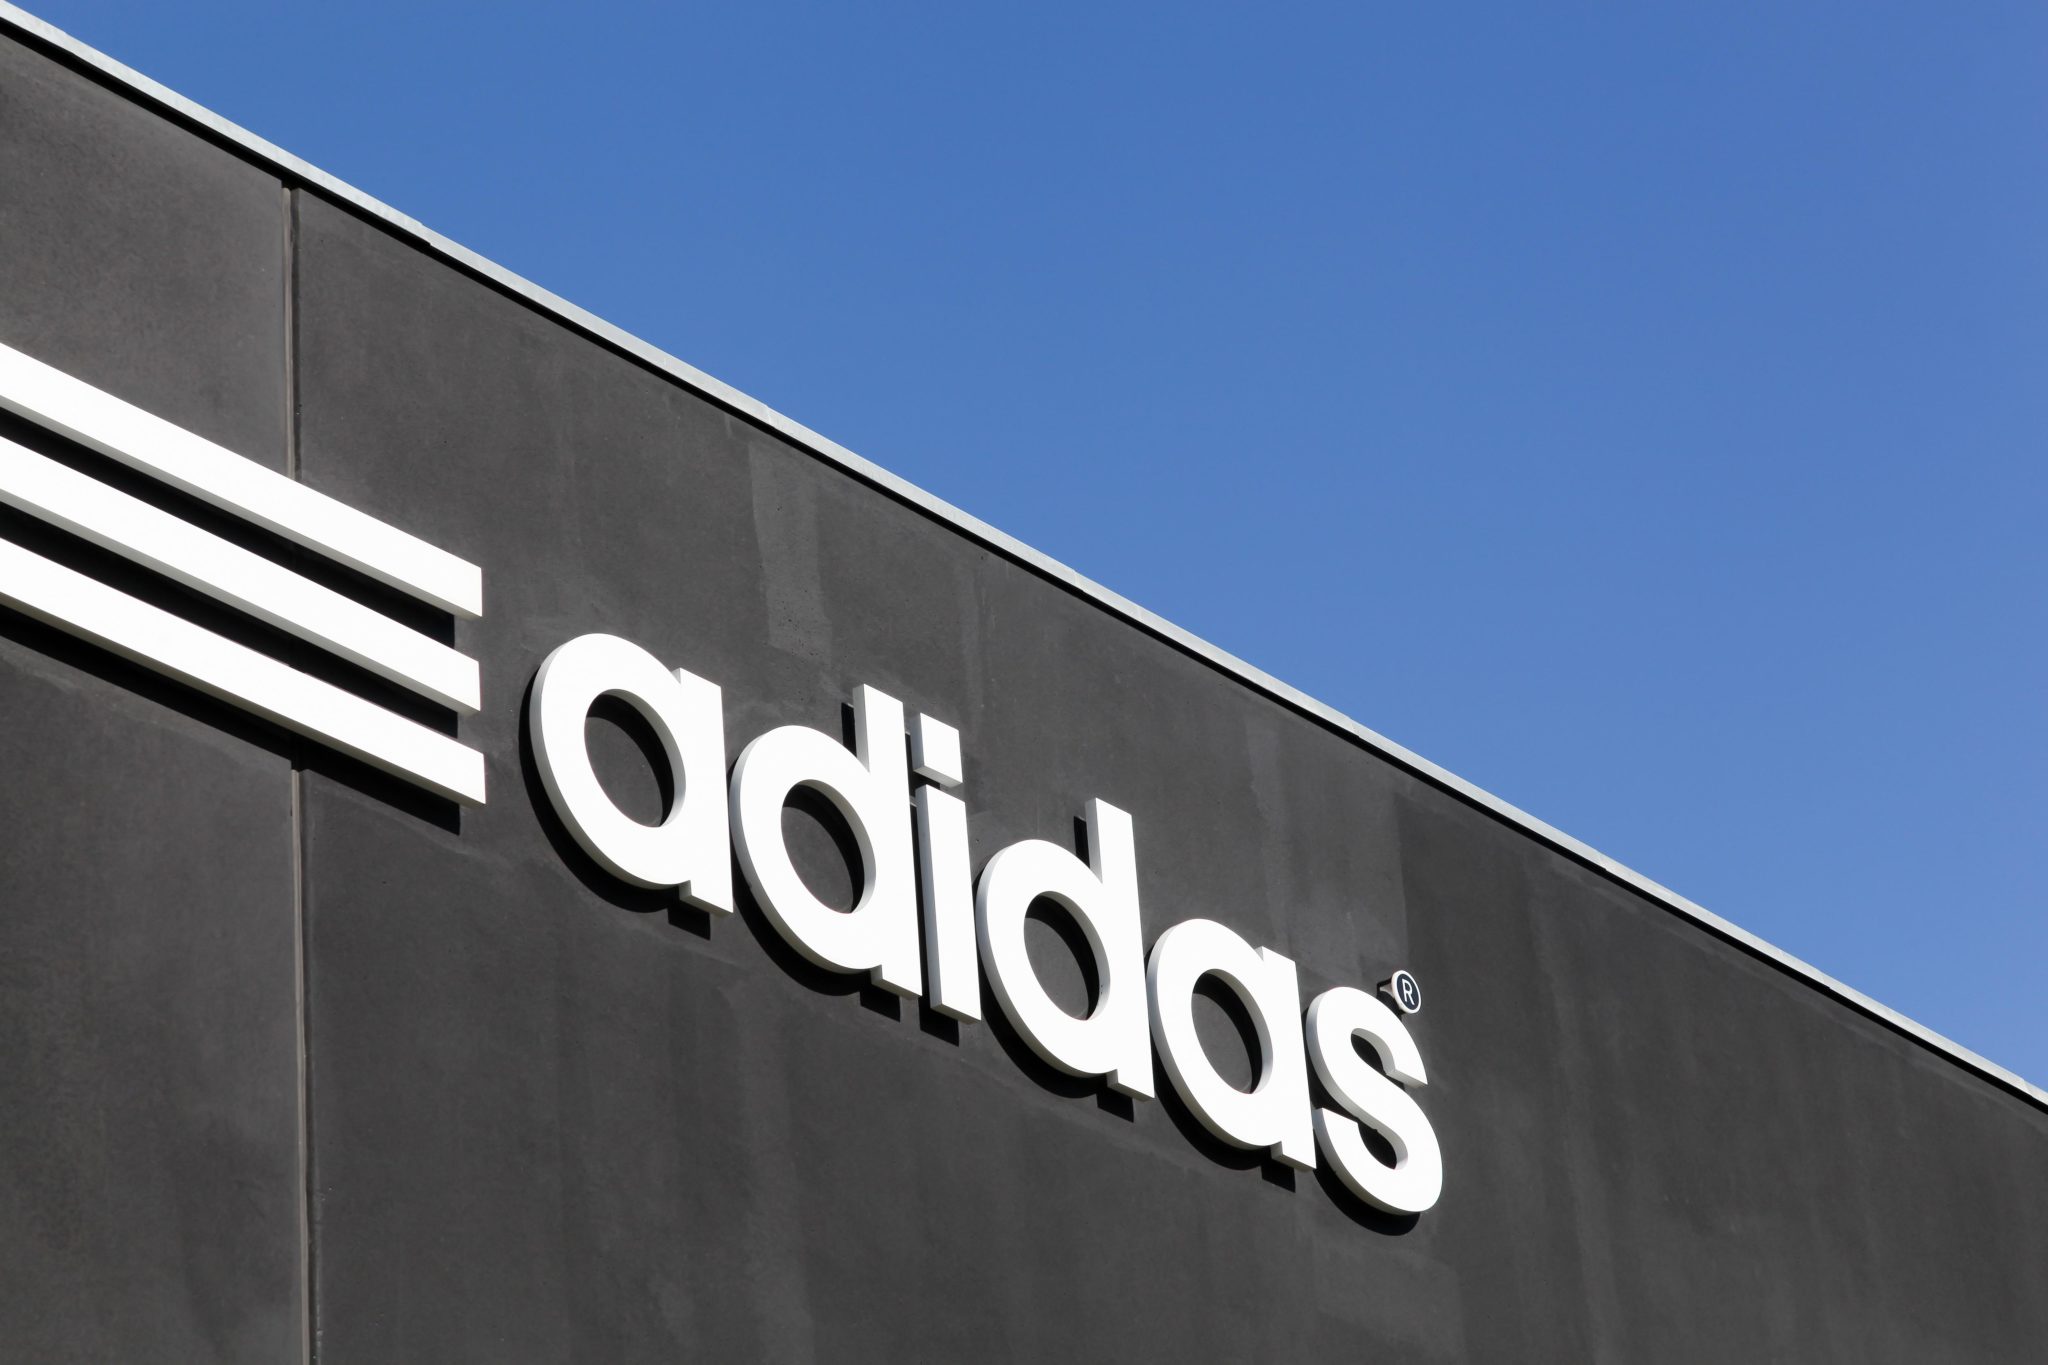 Adidas sports bra adverts banned over images of naked breasts